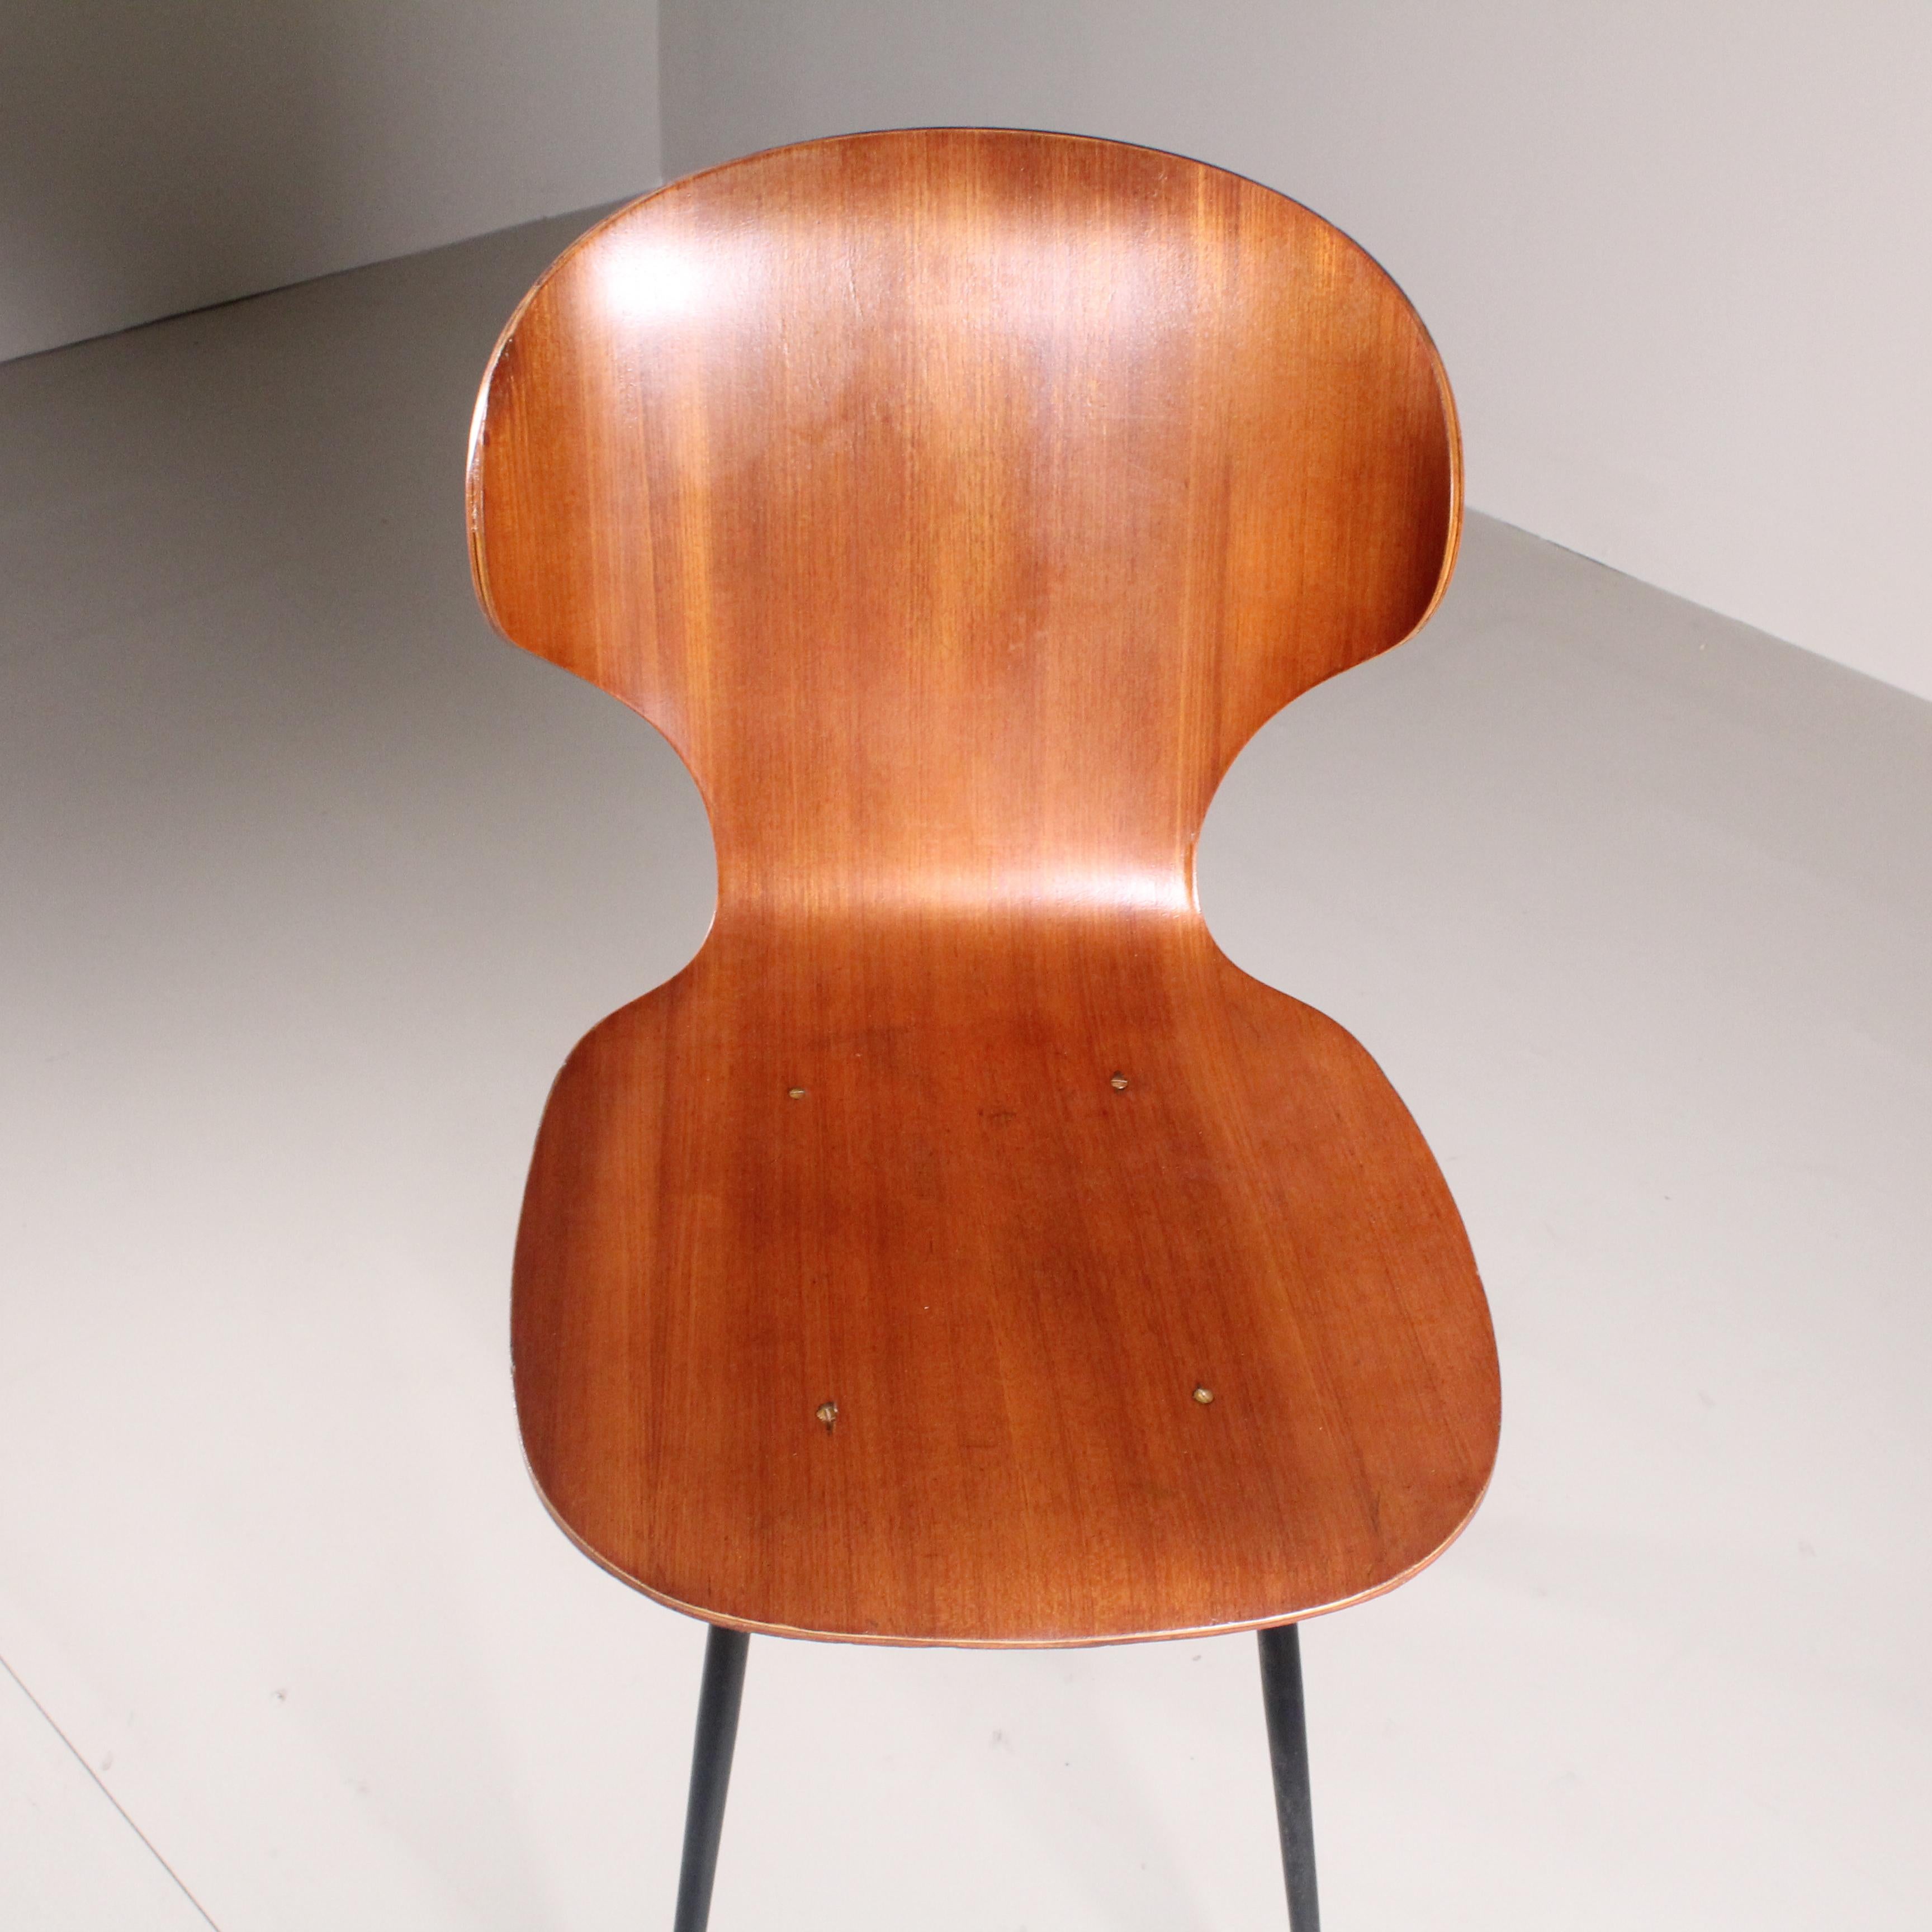 Set of 4 Lulli Chairs, Carlo Ratti, Curved Woods Industry, 1950s For Sale 2